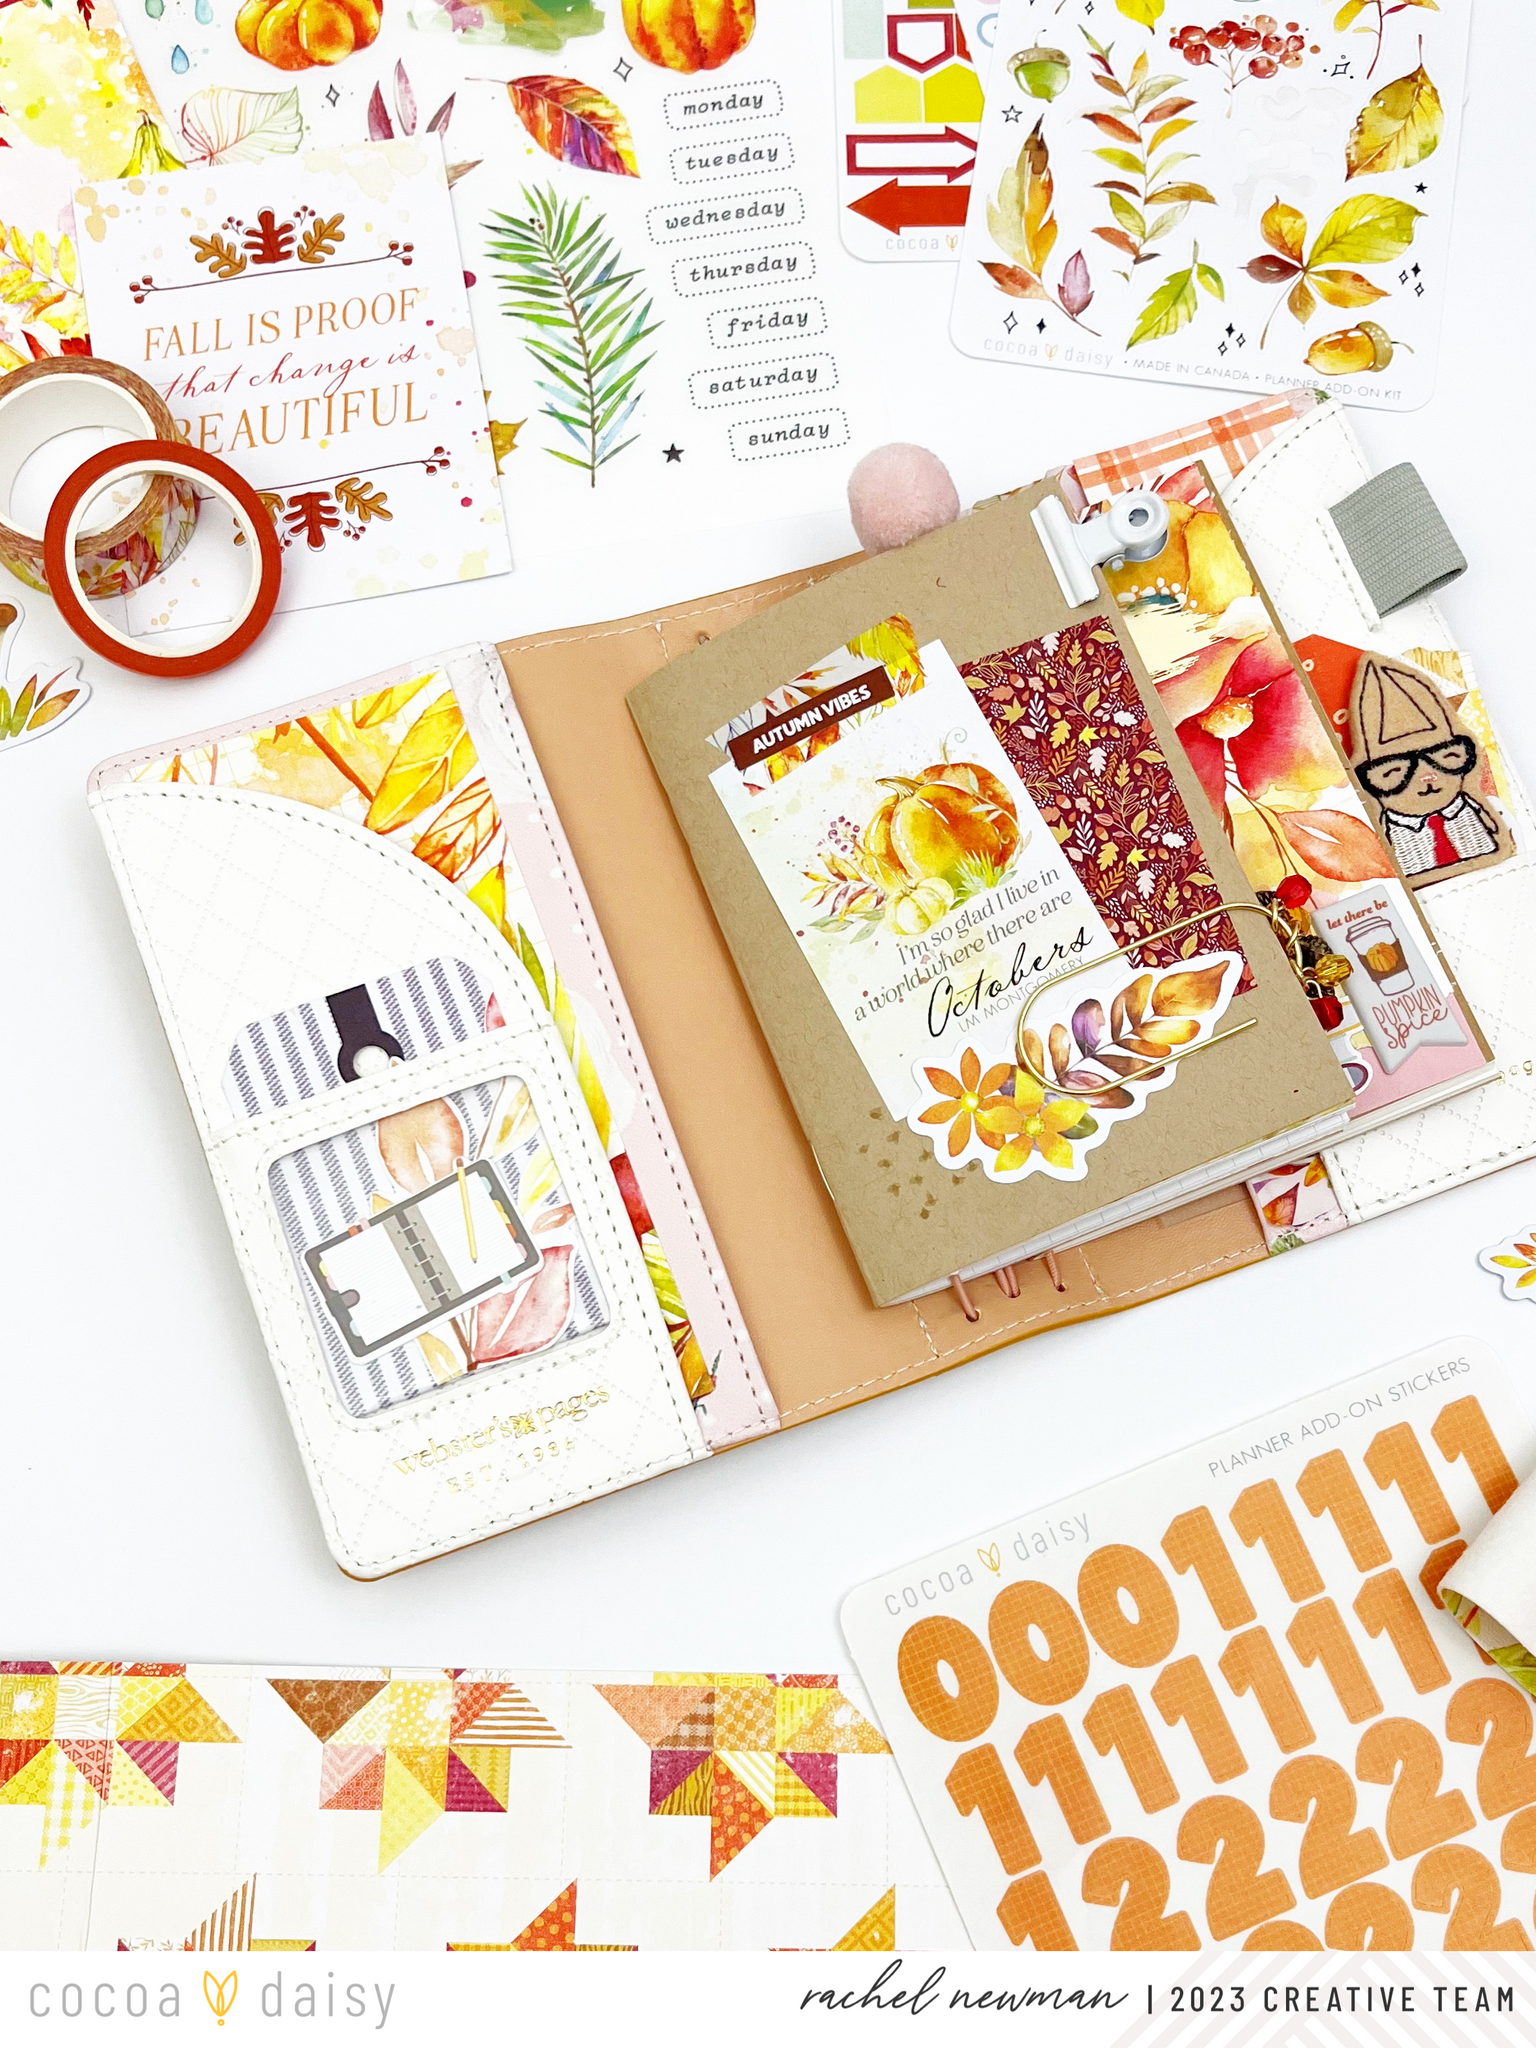 Get Creative Daily with a Scrap Journal!